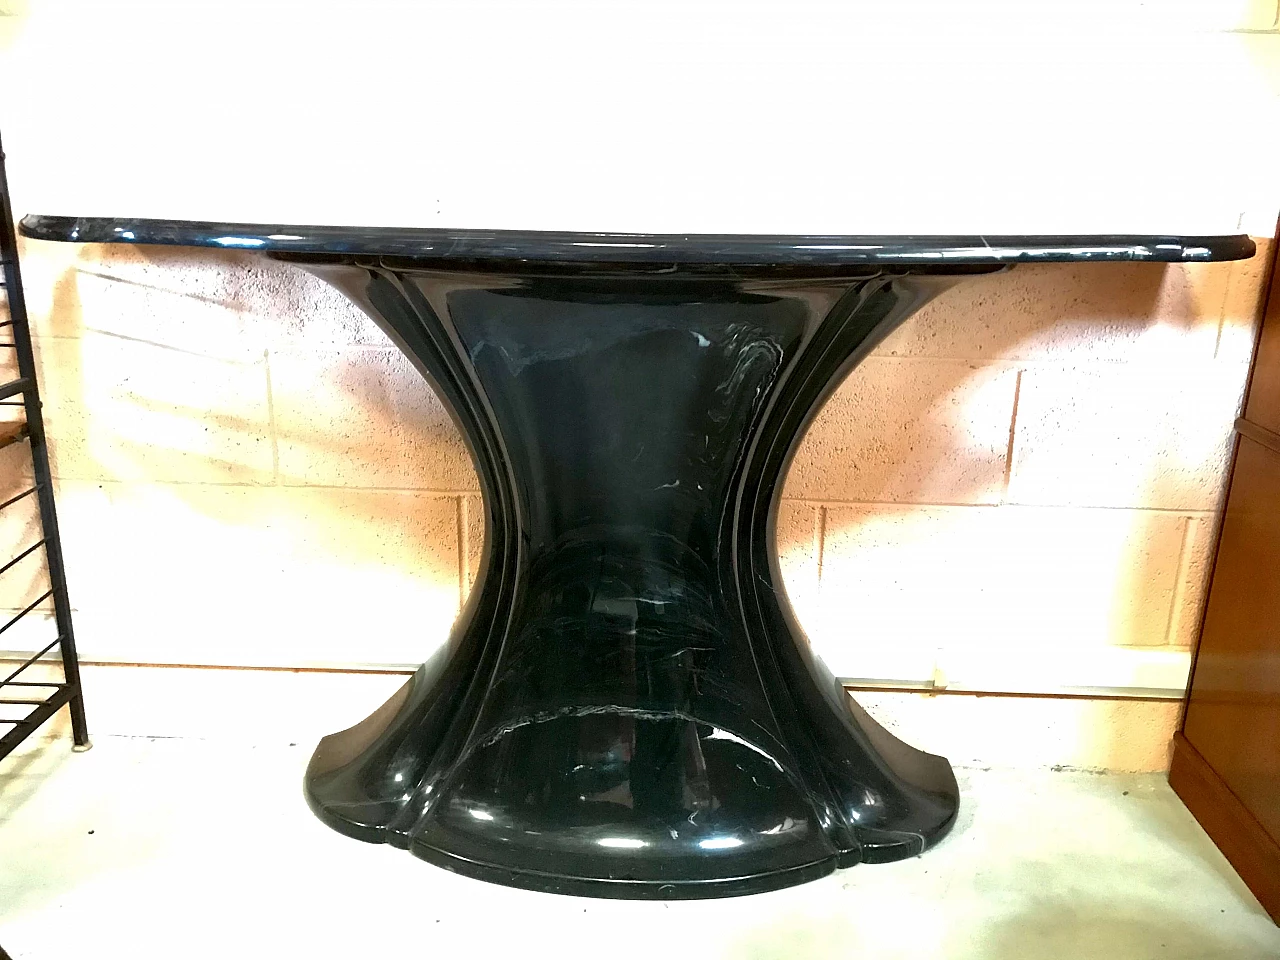 Goblet shaped moved consolle table in faux marble black resin, 60s - 70s 1170677